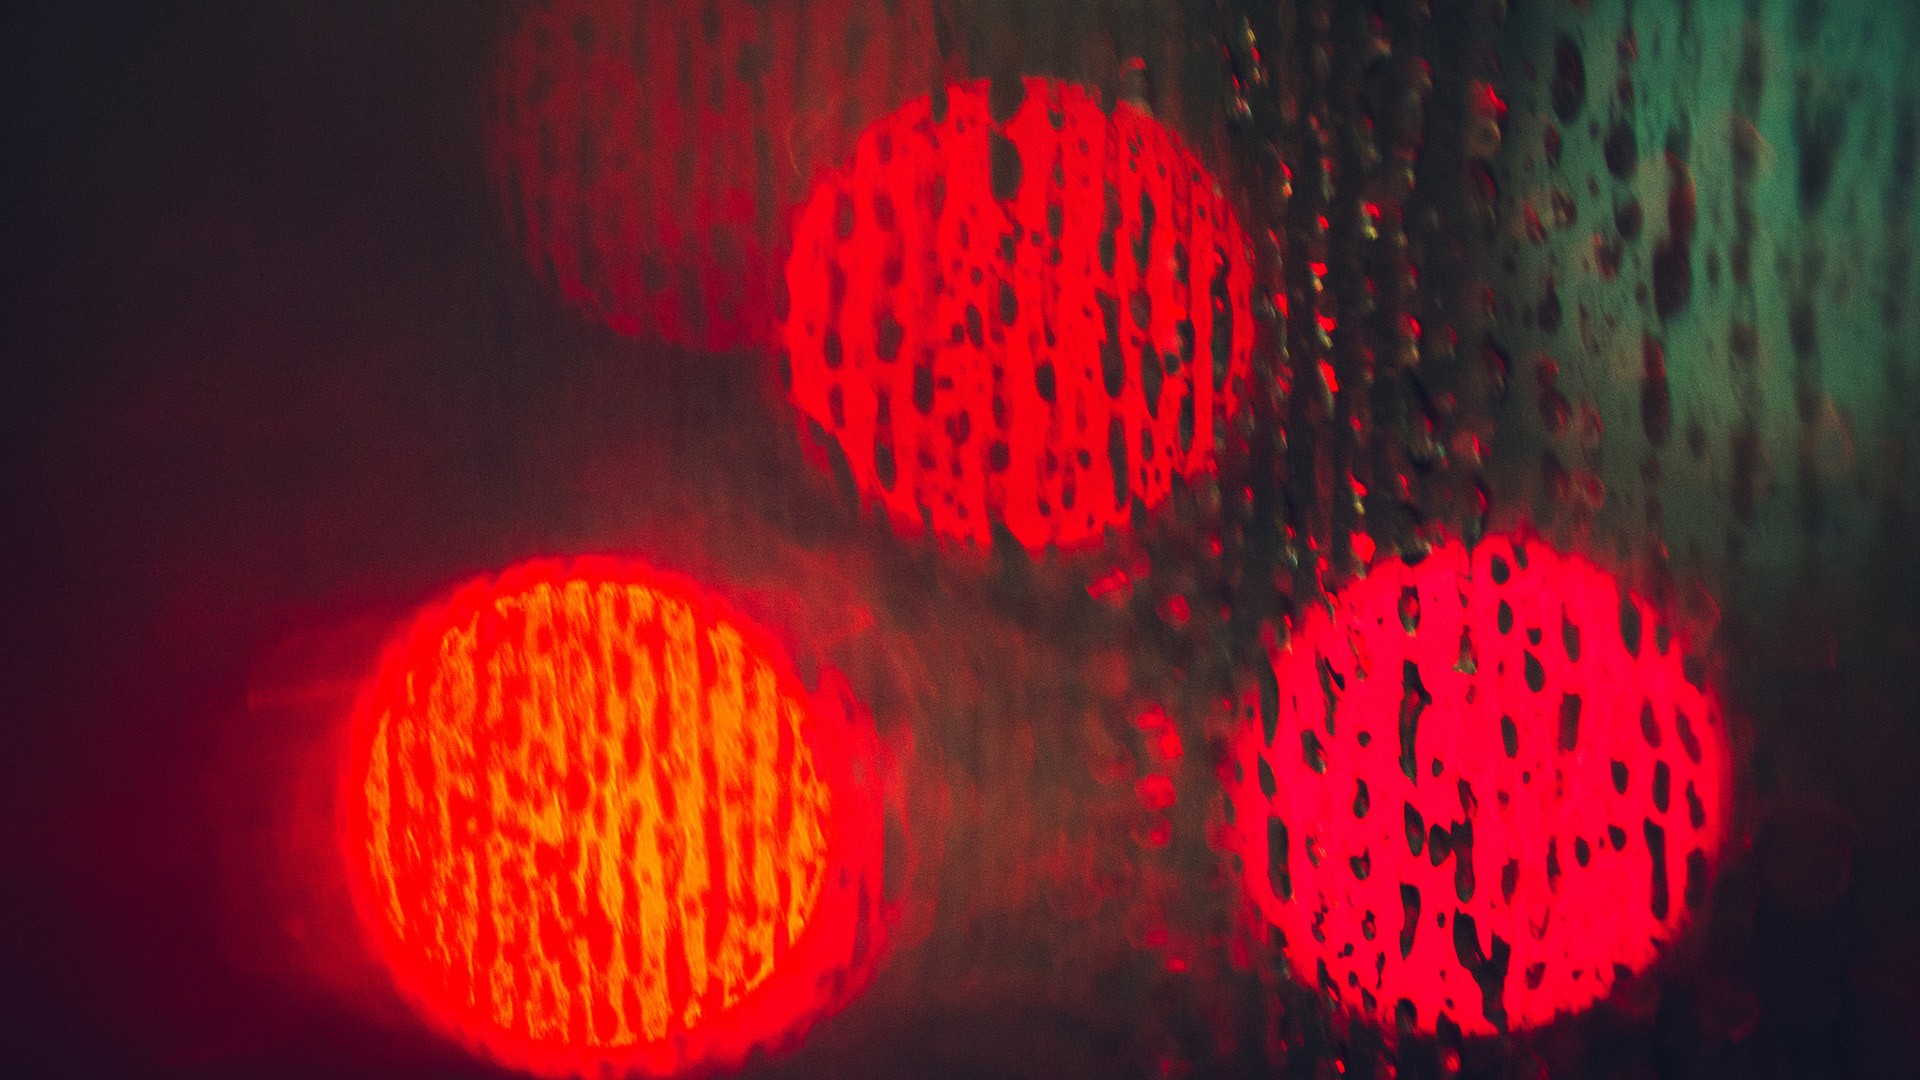 traffic, Lights, Abstract, Red, Sphere, Circle, Round, Drops, Rain, Storm Wallpaper